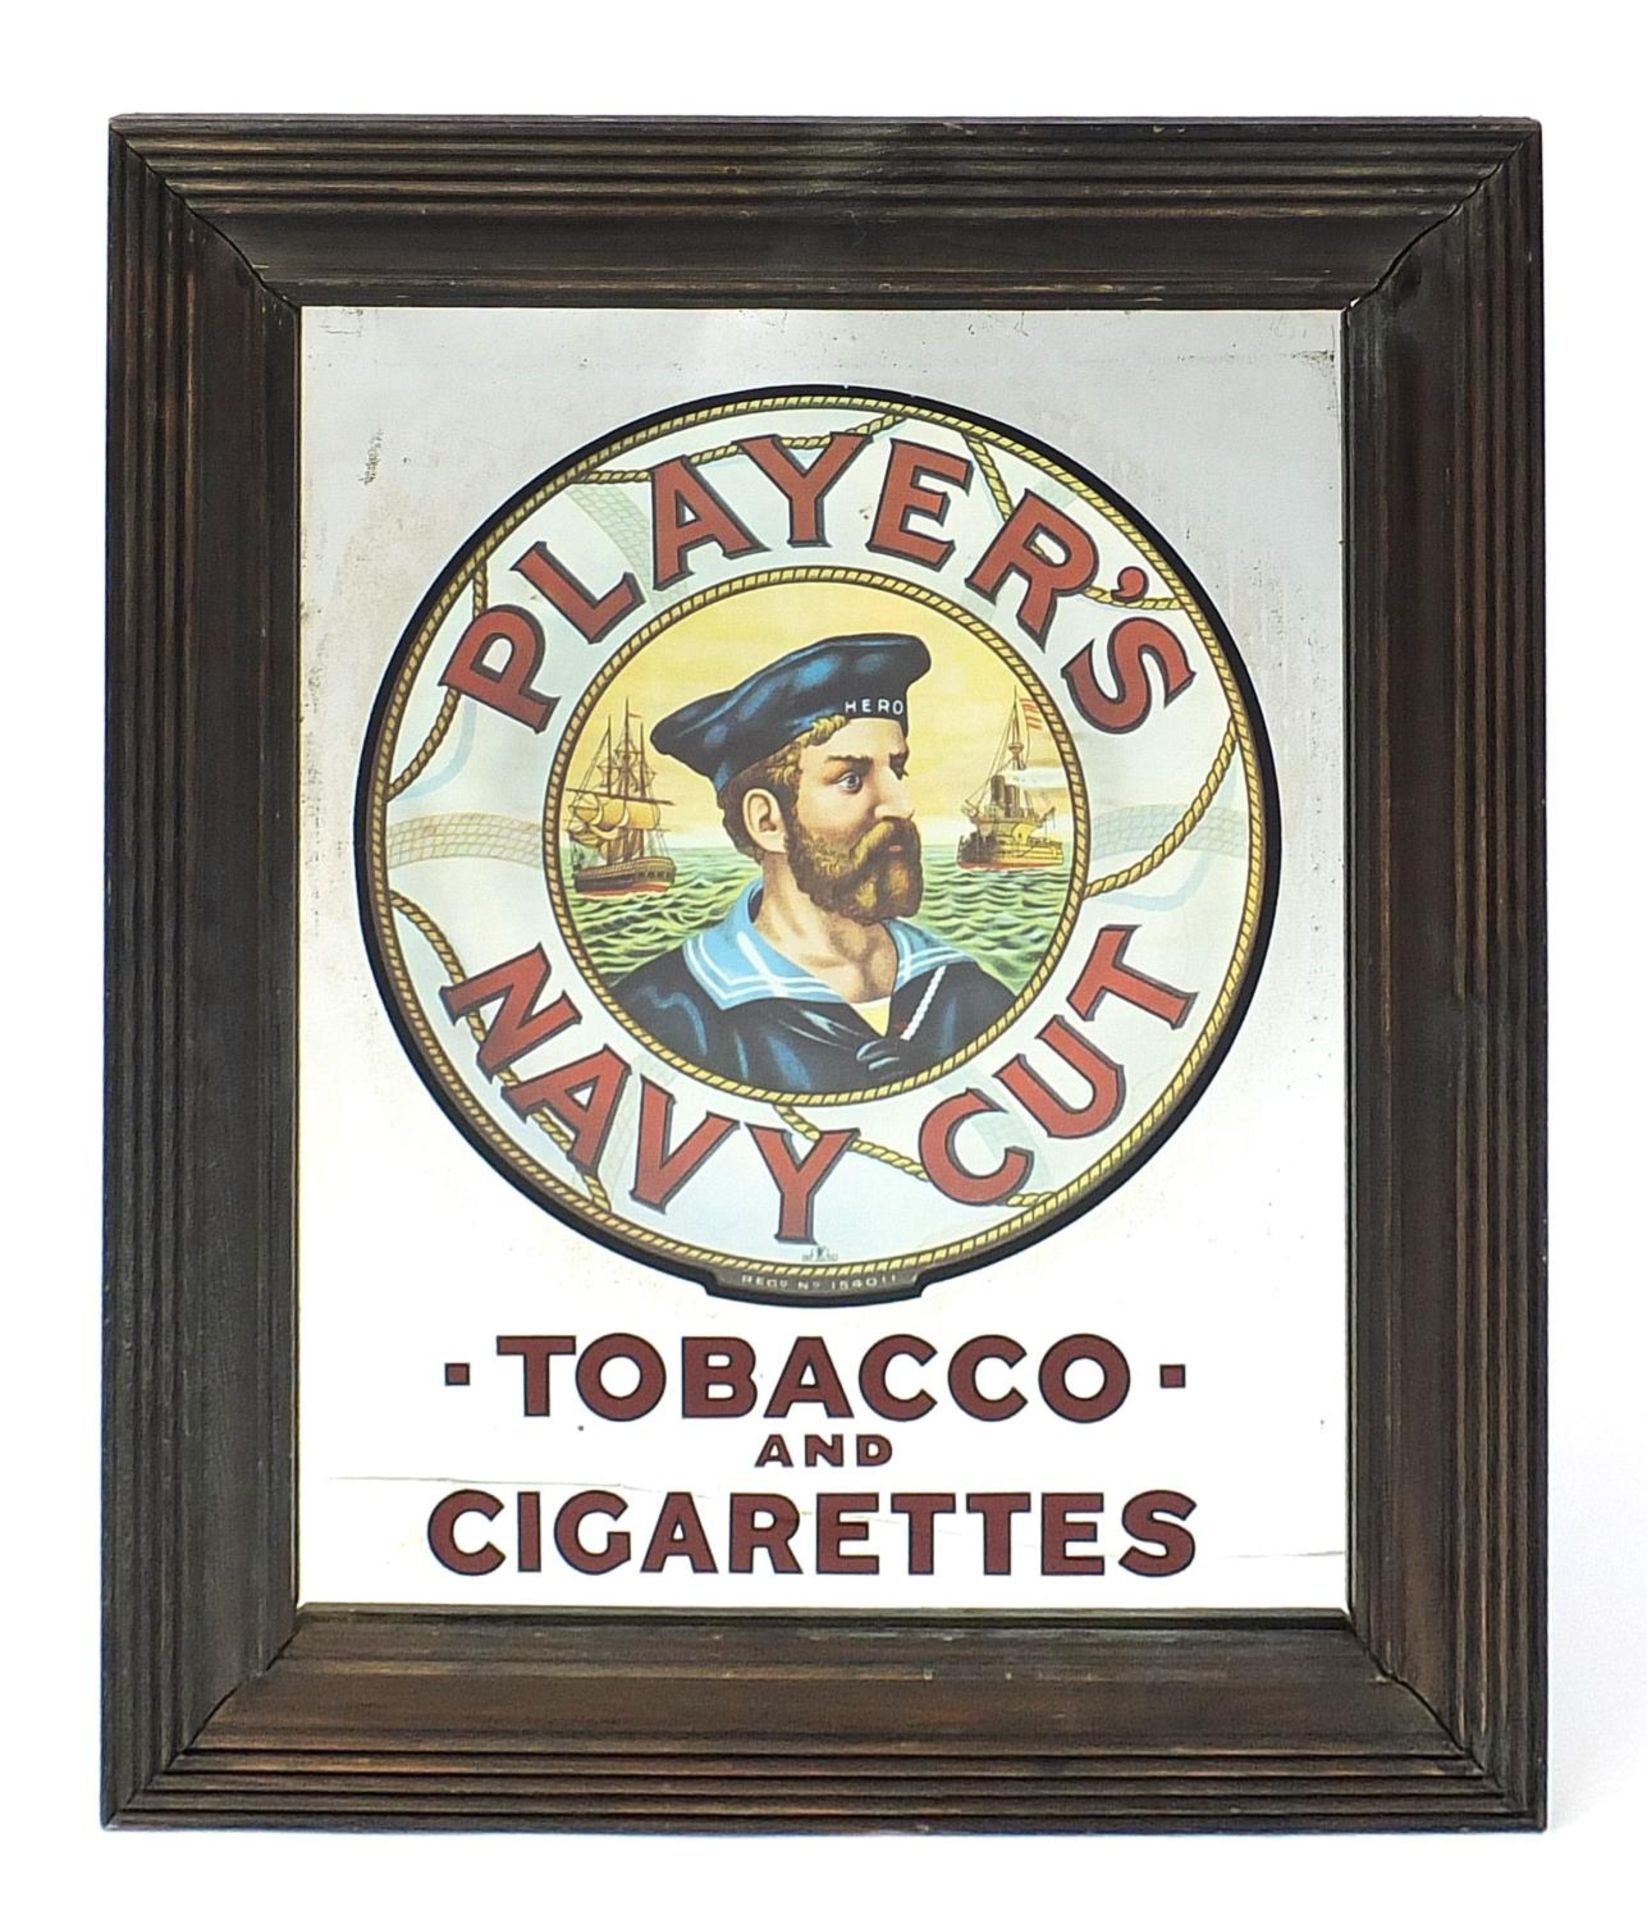 Player's Navy Cut Tobacco & Cigarettes advertising mirror, framed, 60.5cm x 50.5cm overall : For